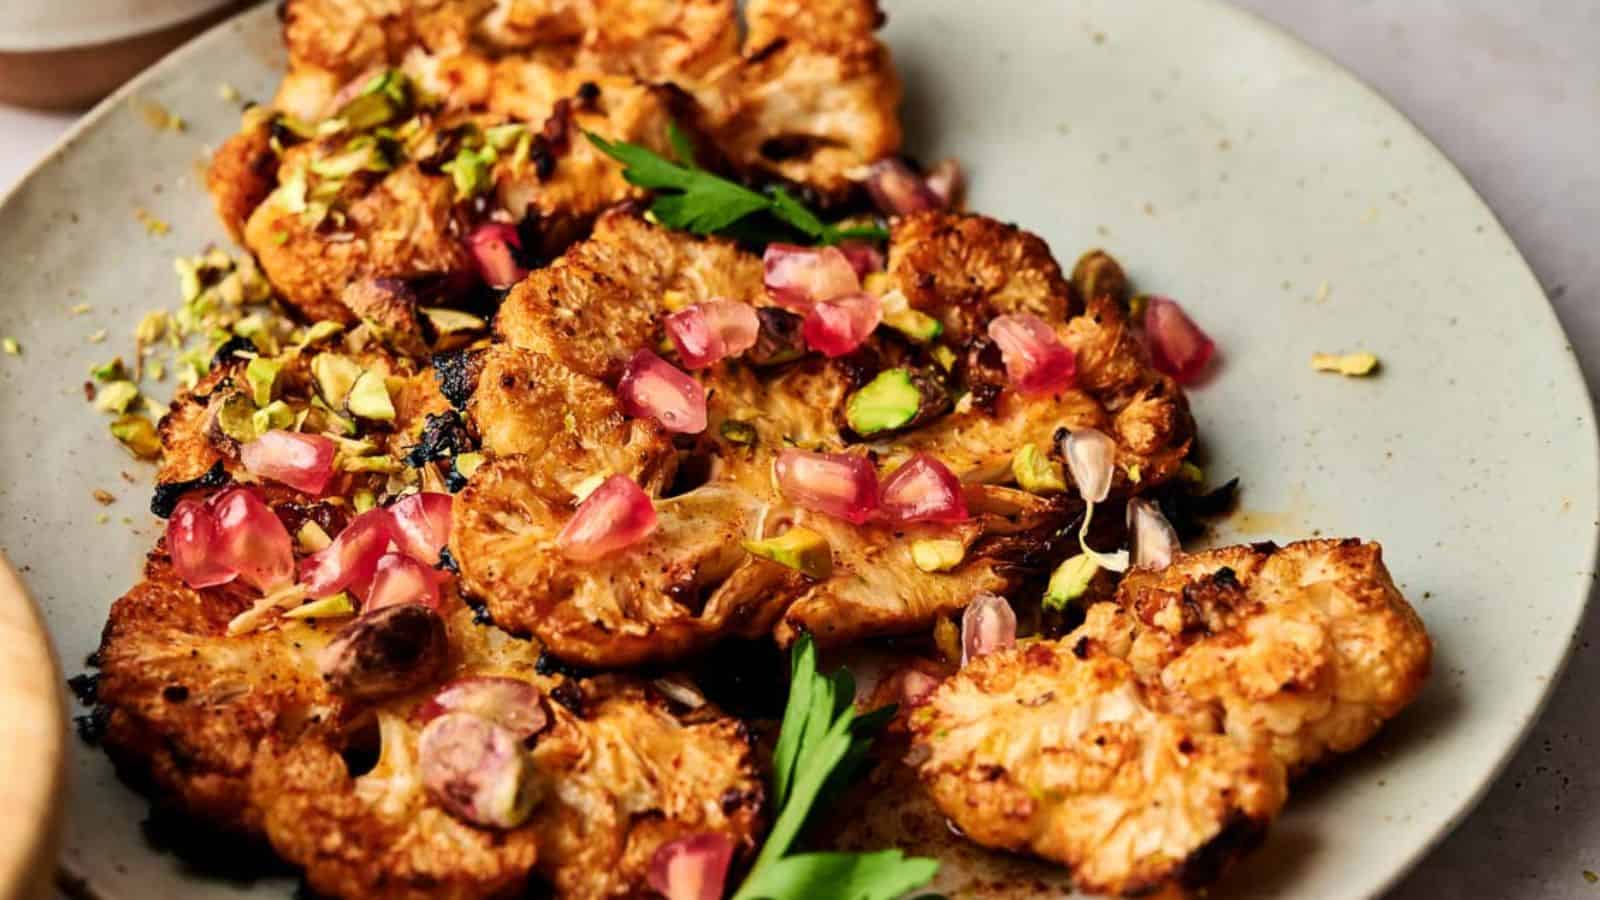 Cauliflower steaks with pomegranate and pistachios on a plate.